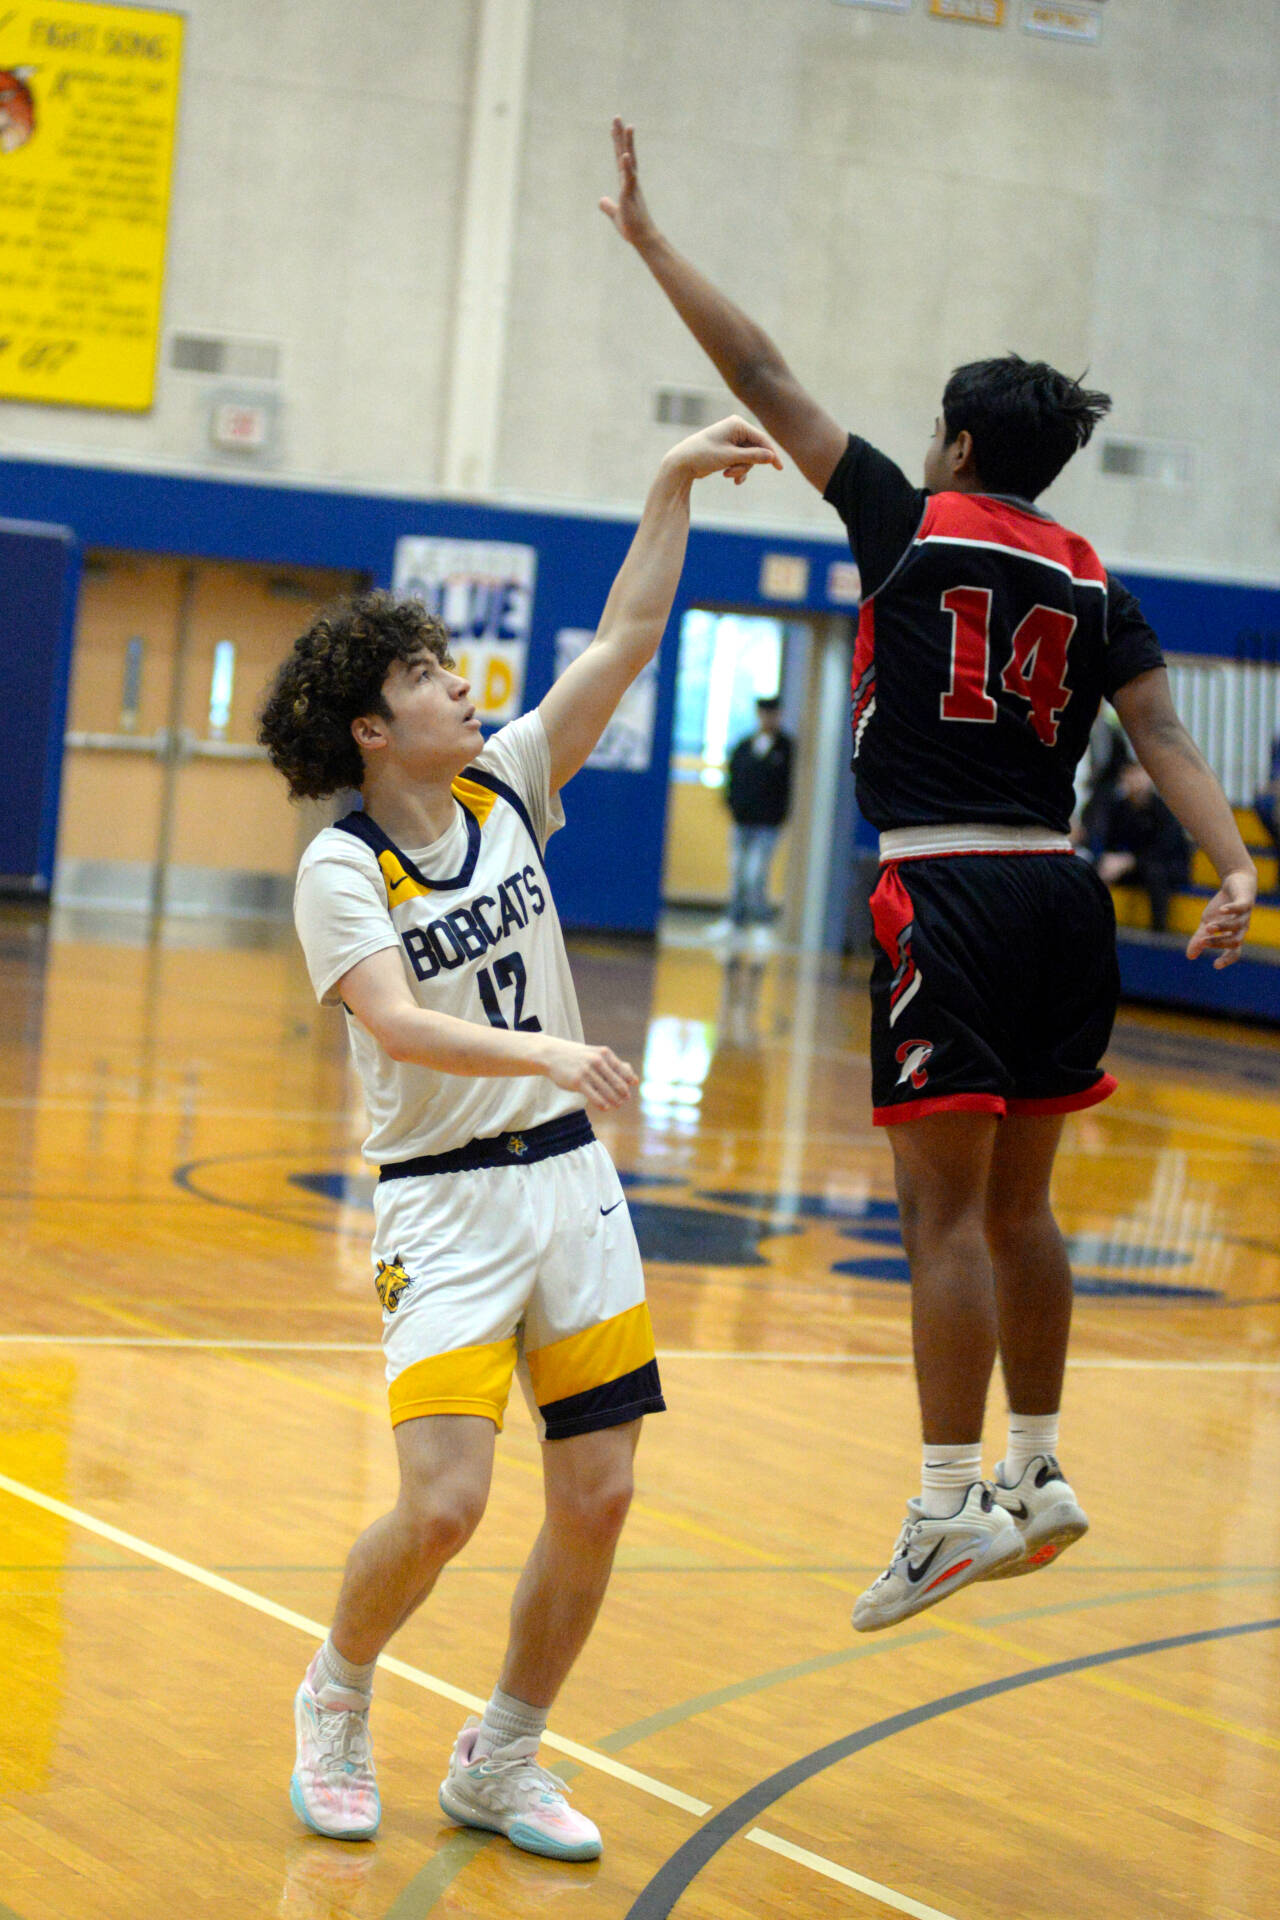 RYAN SPARKS | THE DAILY WORLD Aberdeen’s Manny Garcia (12) shoots a 3-pointer while defended by Raymond’s Chris Quintana during the Bobcats’ 55-54 win on Saturday in Aberdeen.